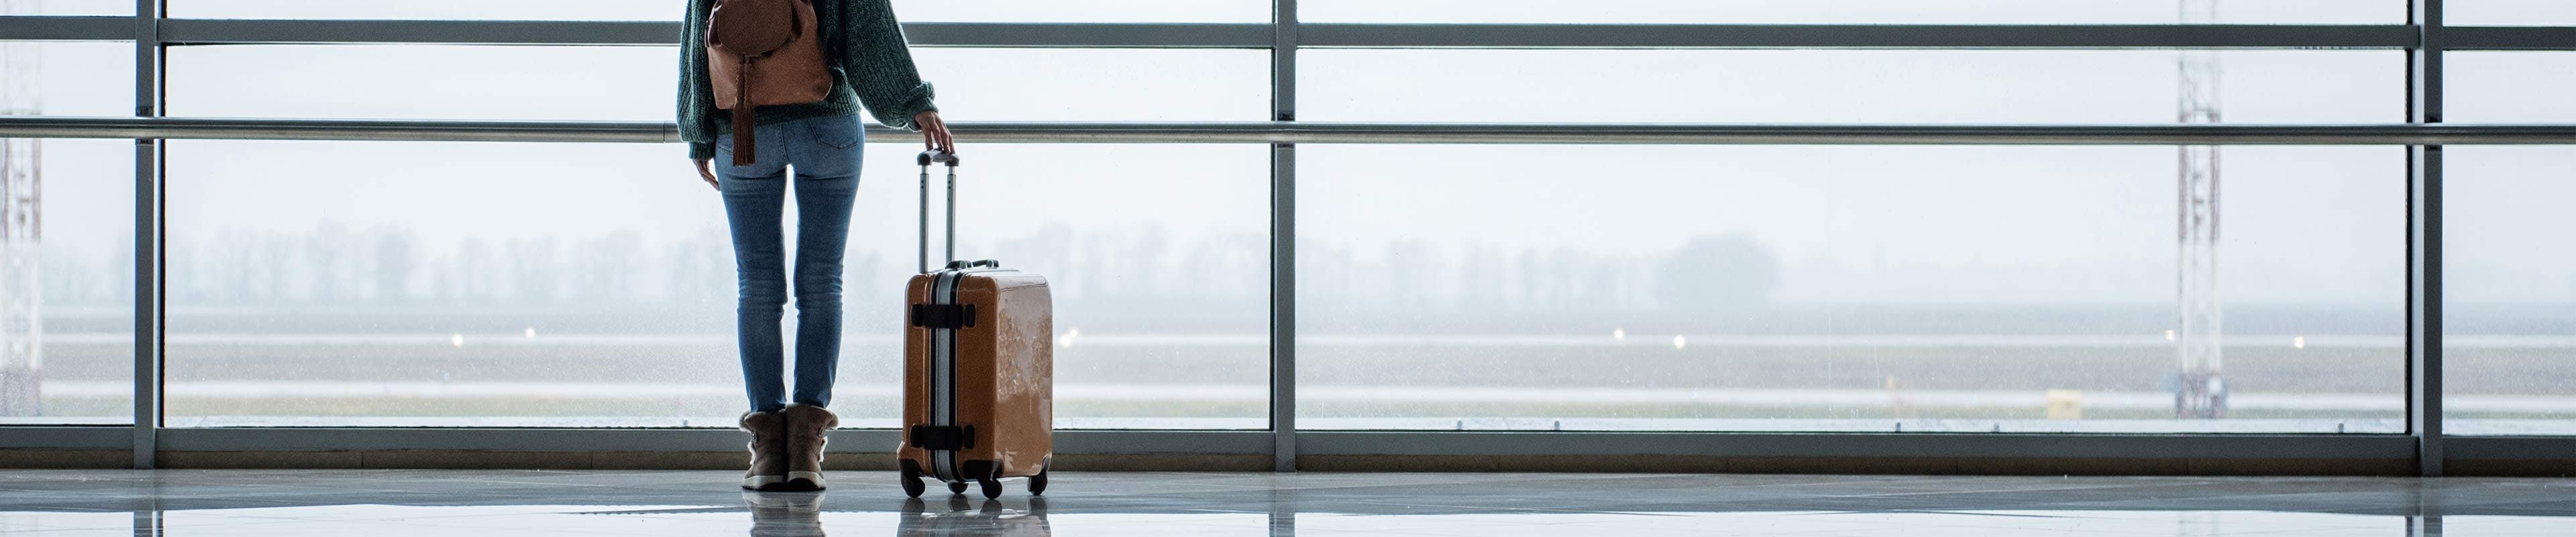 Young woman standing with her back to the camera with a backpack and rolling suitcase looking out at a runway at the airport through a floor-to-ceiling window.